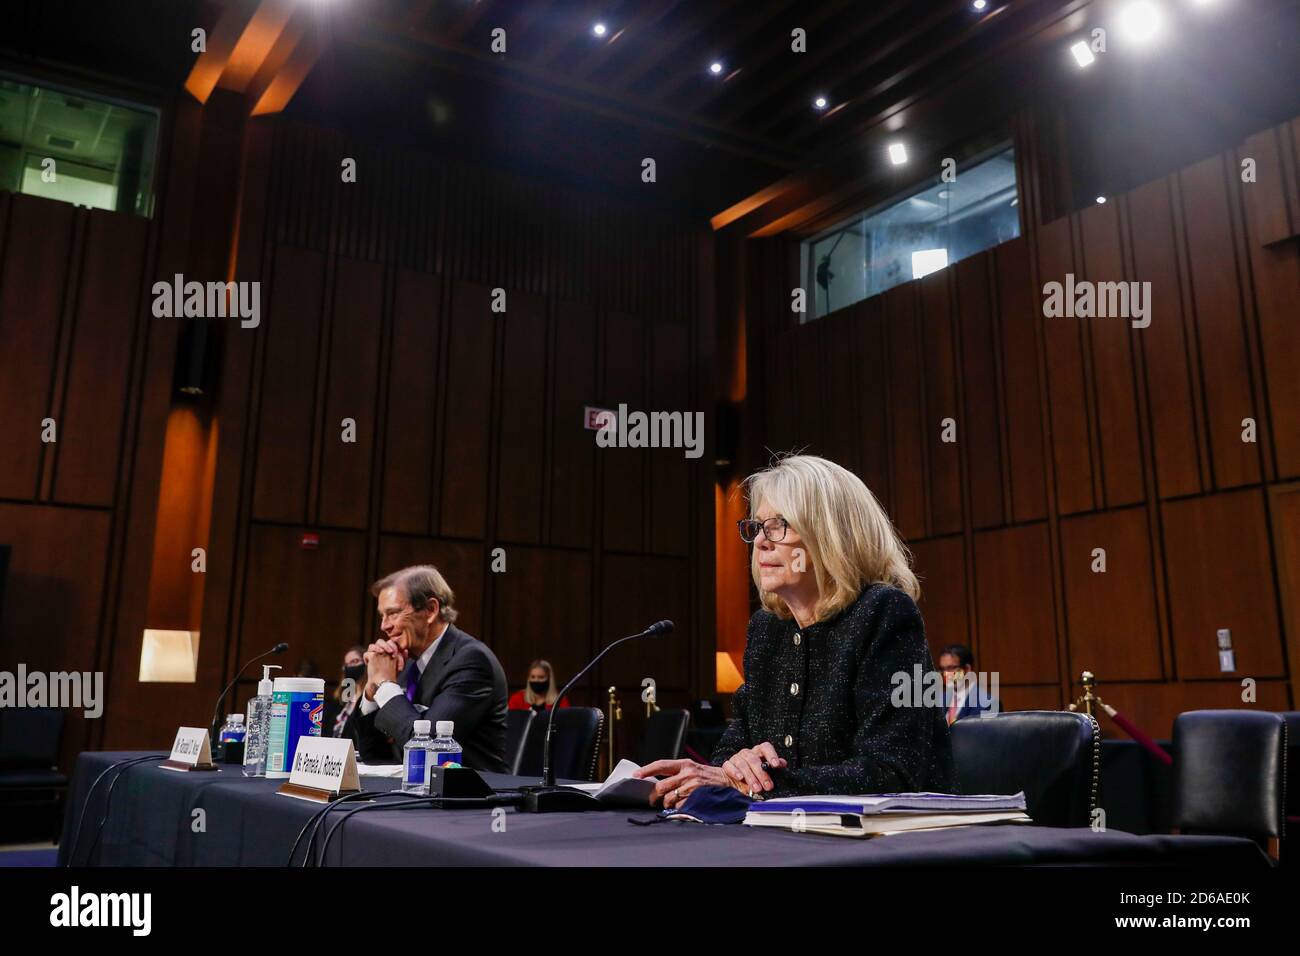 Washington, DC, USA. 15th Oct, 2020. American Bar Association representatives Pamela Roberts (R) and Randall Noel (L) participate in the confirmation hearing for Supreme Court nominee Judge Amy Coney Barrett before the Senate Judiciary Committee on Capitol Hill in Washington, DC, USA, 15 October 2020. Barrett was nominated by President Donald Trump to fill the vacancy left by Justice Ruth Bader Ginsburg who passed away in September.Credit: Shawn Thew/Pool via CNP | usage worldwide Credit: dpa/Alamy Live News Stock Photo